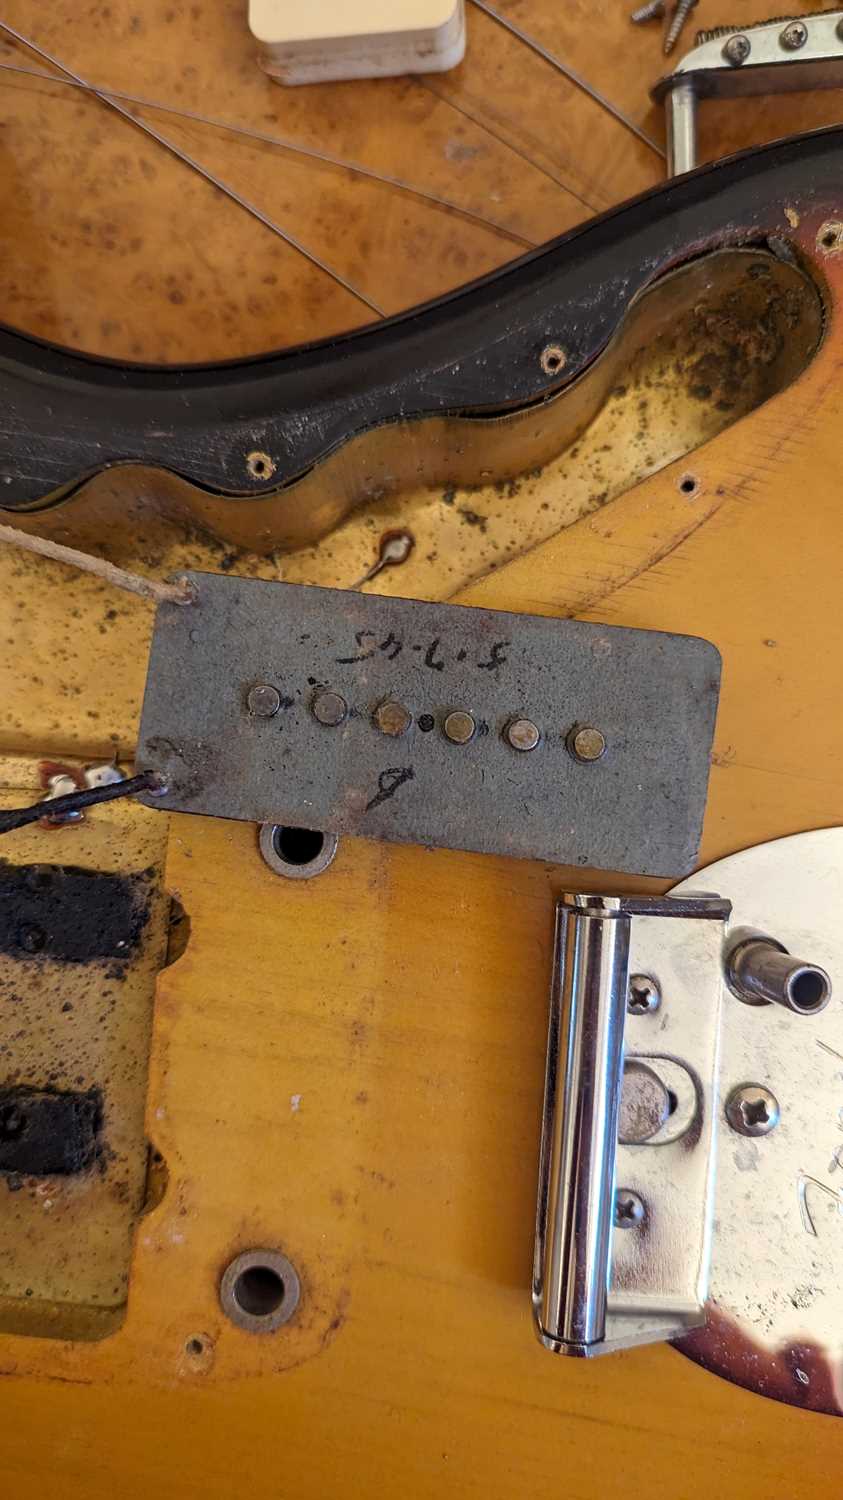 A 1965 Fender Jazzmaster electric guitar, - Image 16 of 16